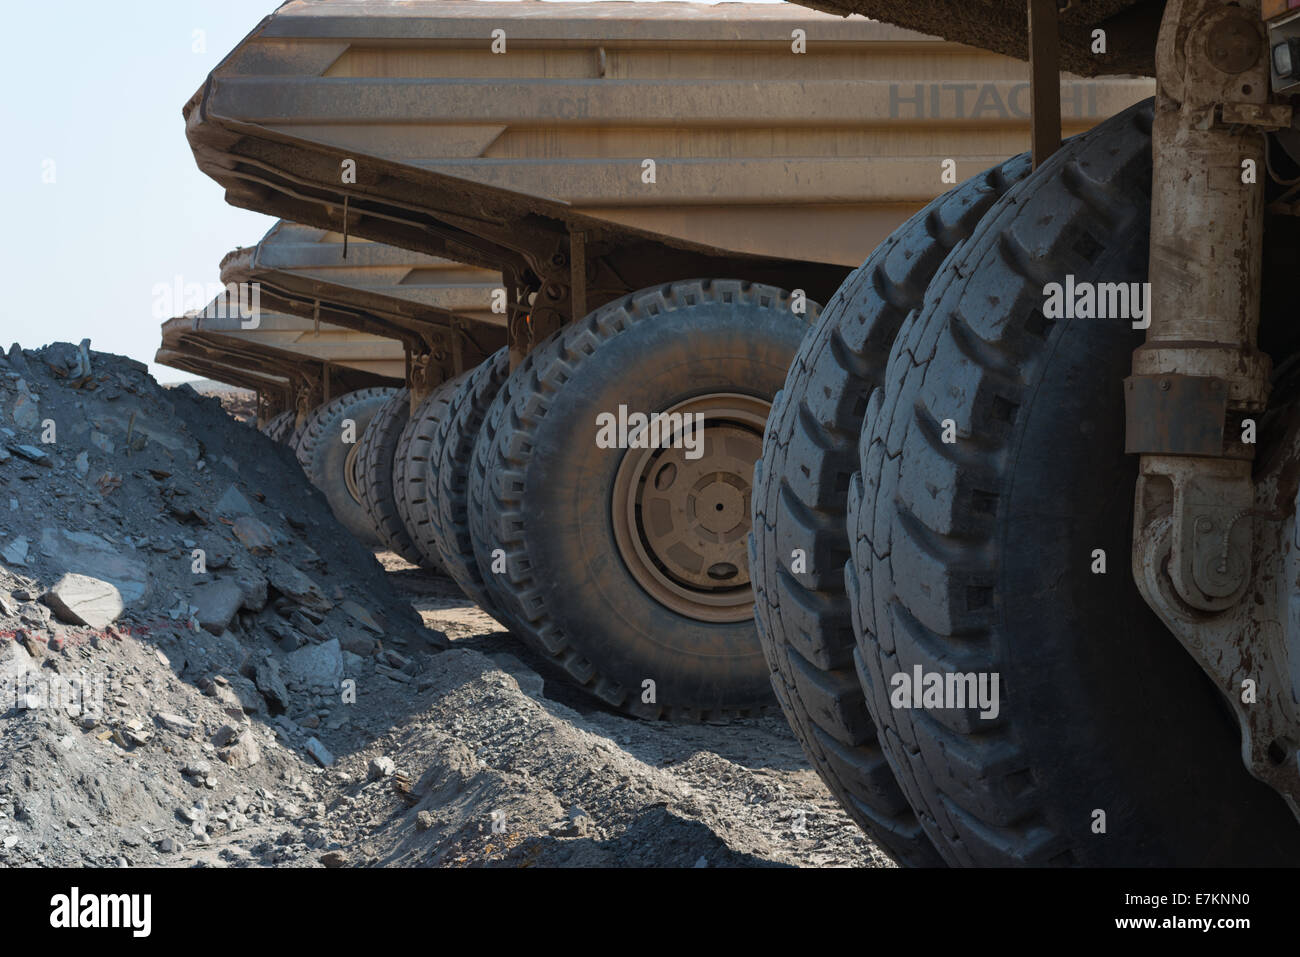 A mine employee climbs up the front of his Hitatchi dump truck during shift change. Stock Photo